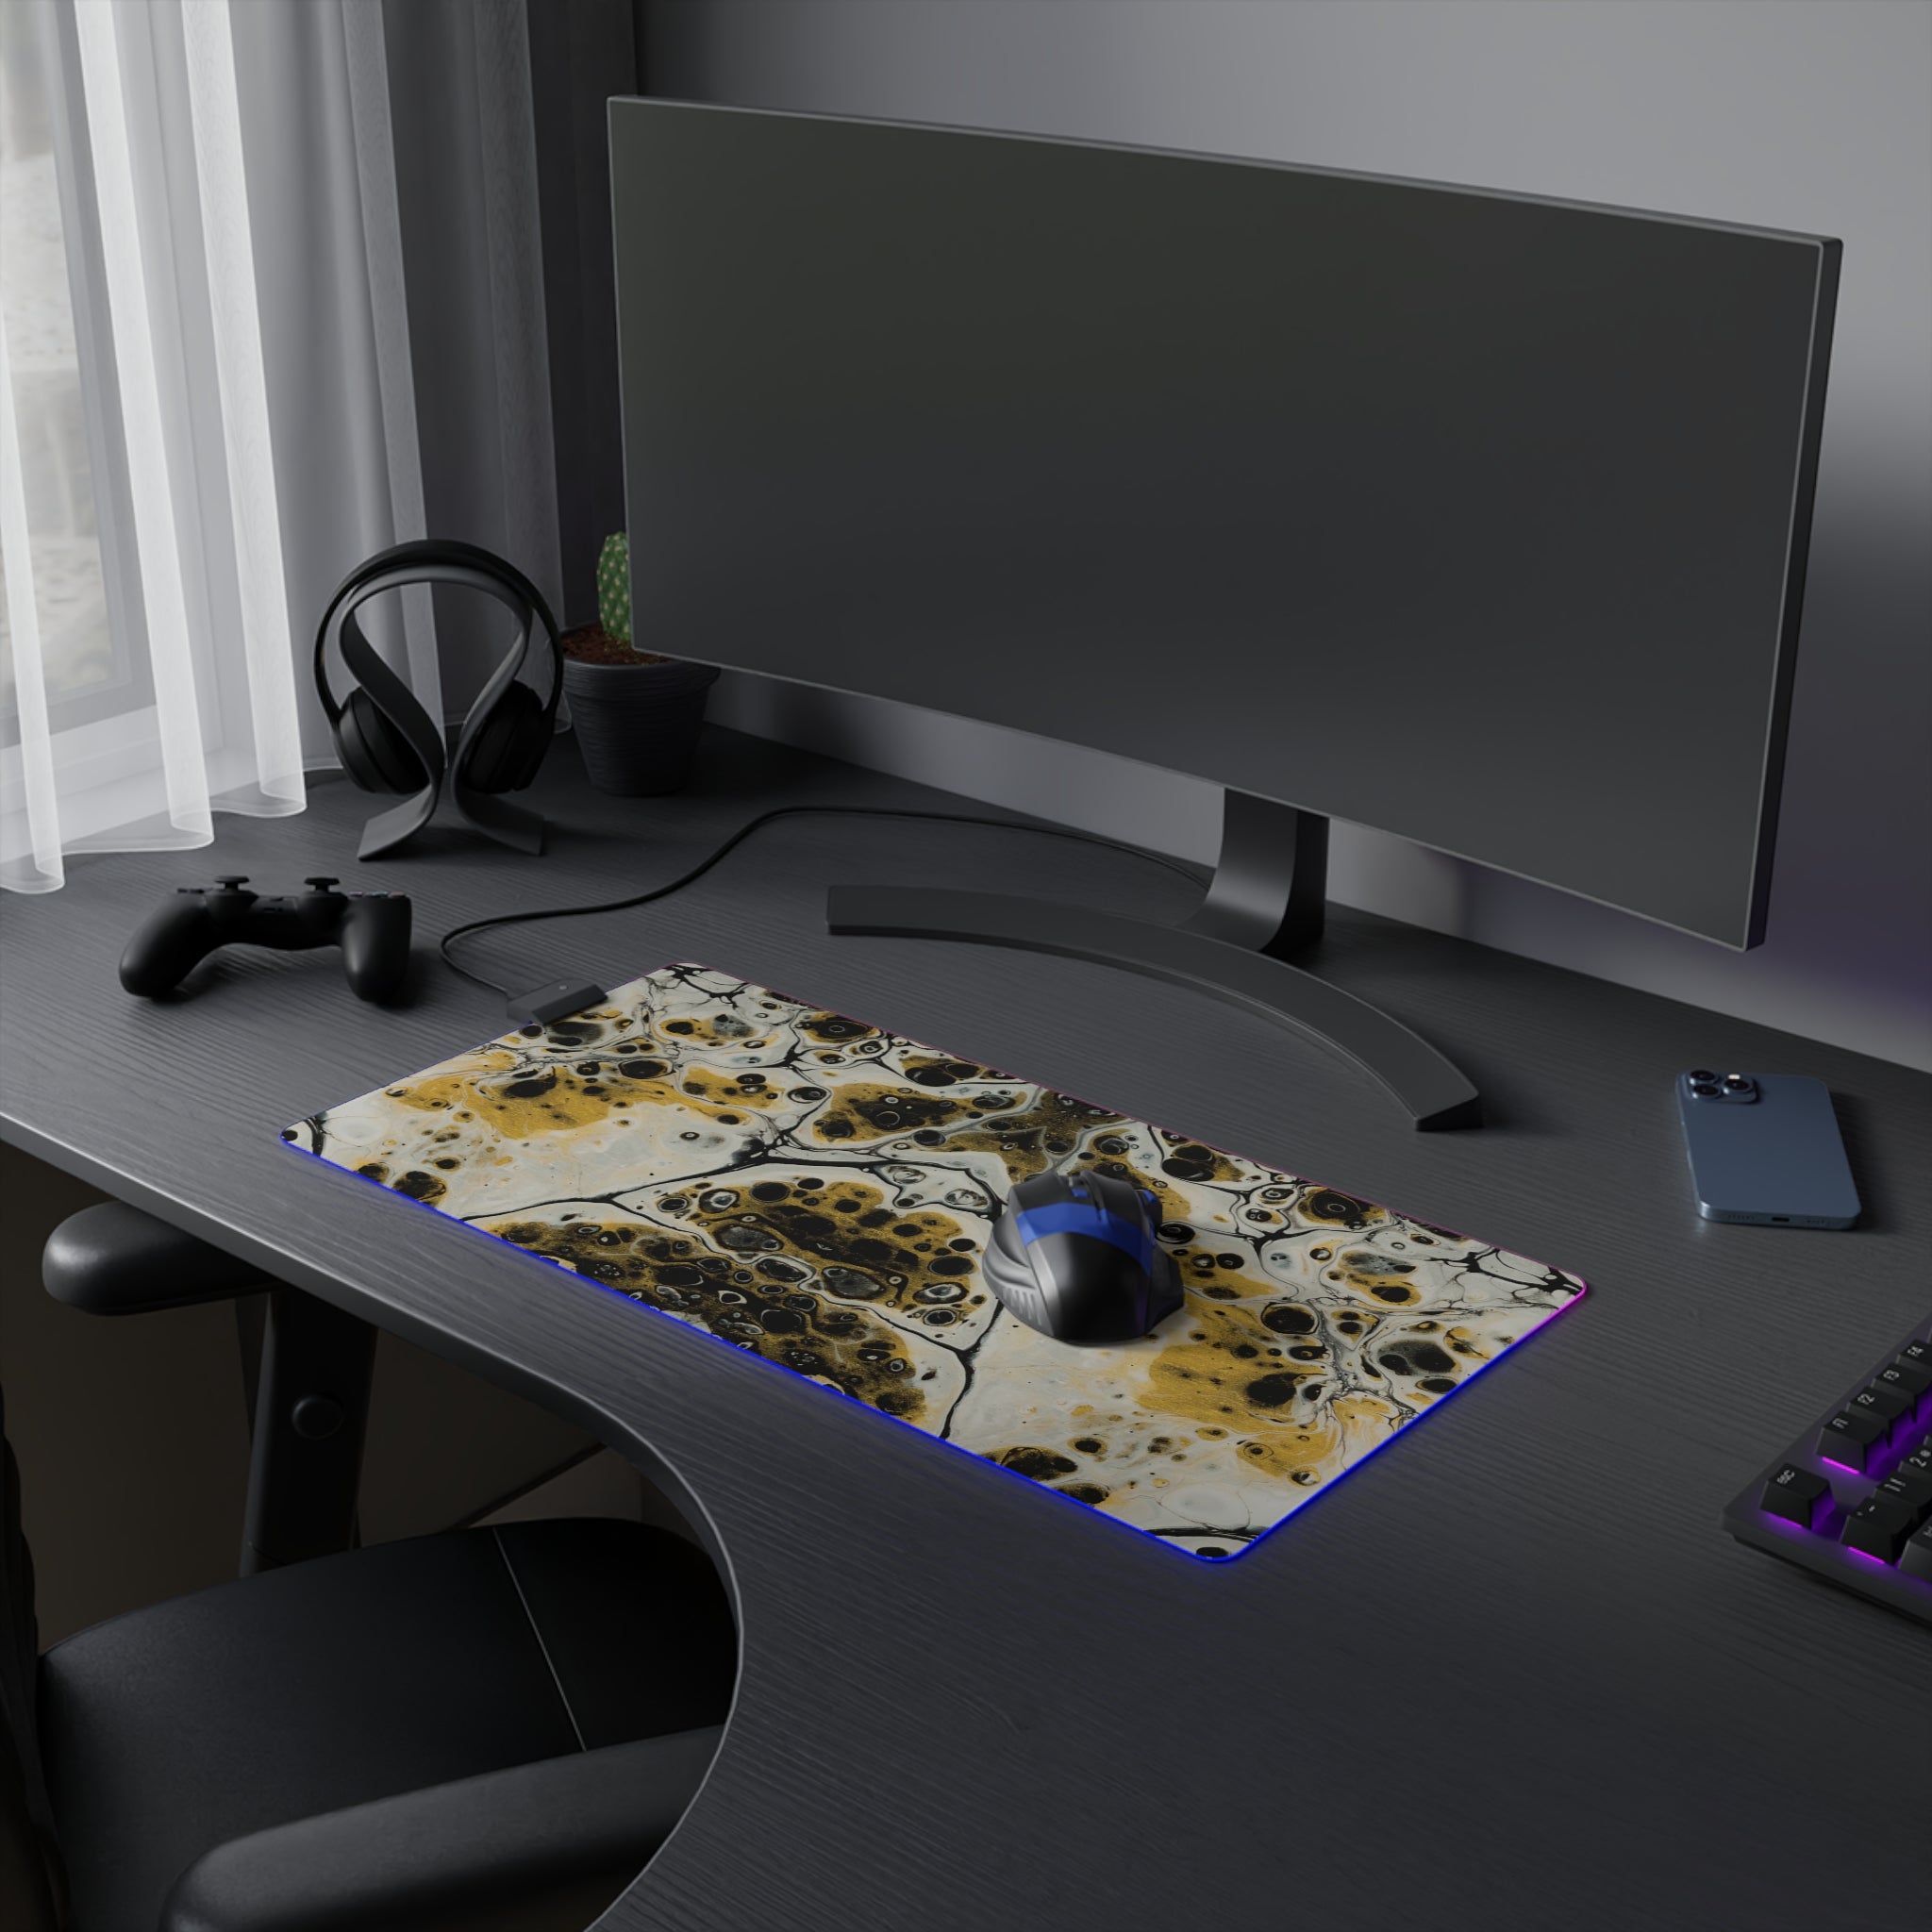 Cameron Creations - LED Gaming Mouse Pad - Golden Ghosts - Concept 4